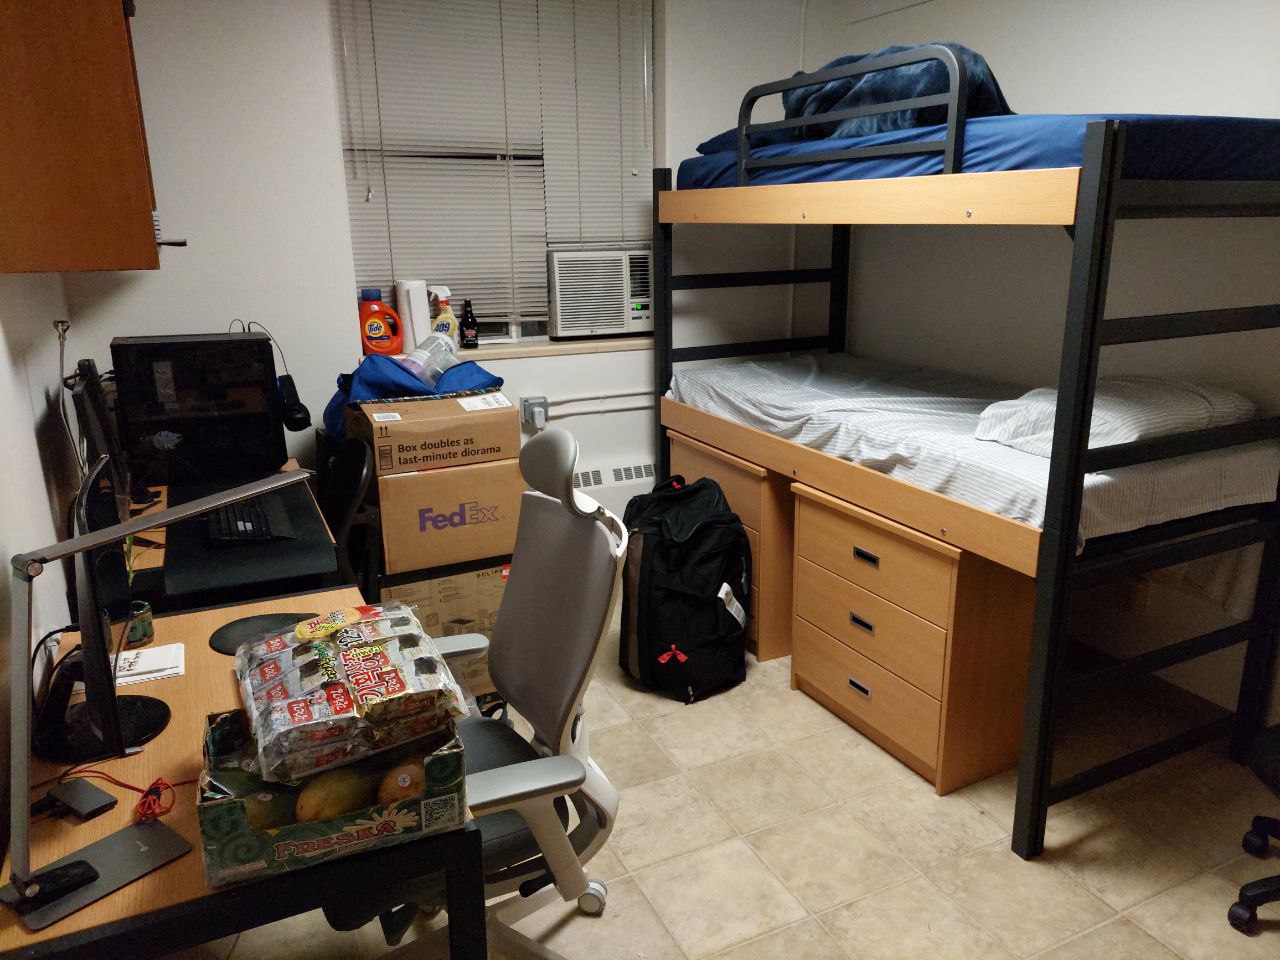 Growing Student Body Leads to Undergraduate Housing Shortage